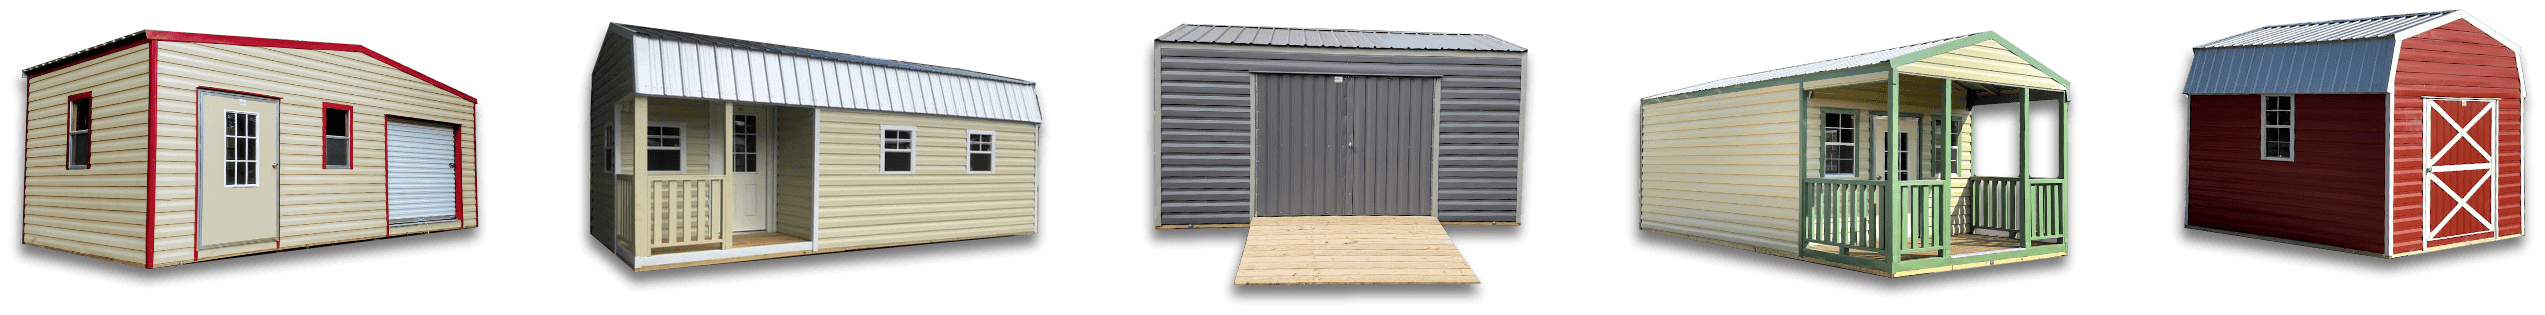 20x20 Sheds for Sale: Explore our versatile selection of 20x20 portable buildings and storage sheds. Find your ideal 20x20 shed dealer for durable outdoor storage solutions at Robin Sheds. Discover various shed styles at Robin Sheds.